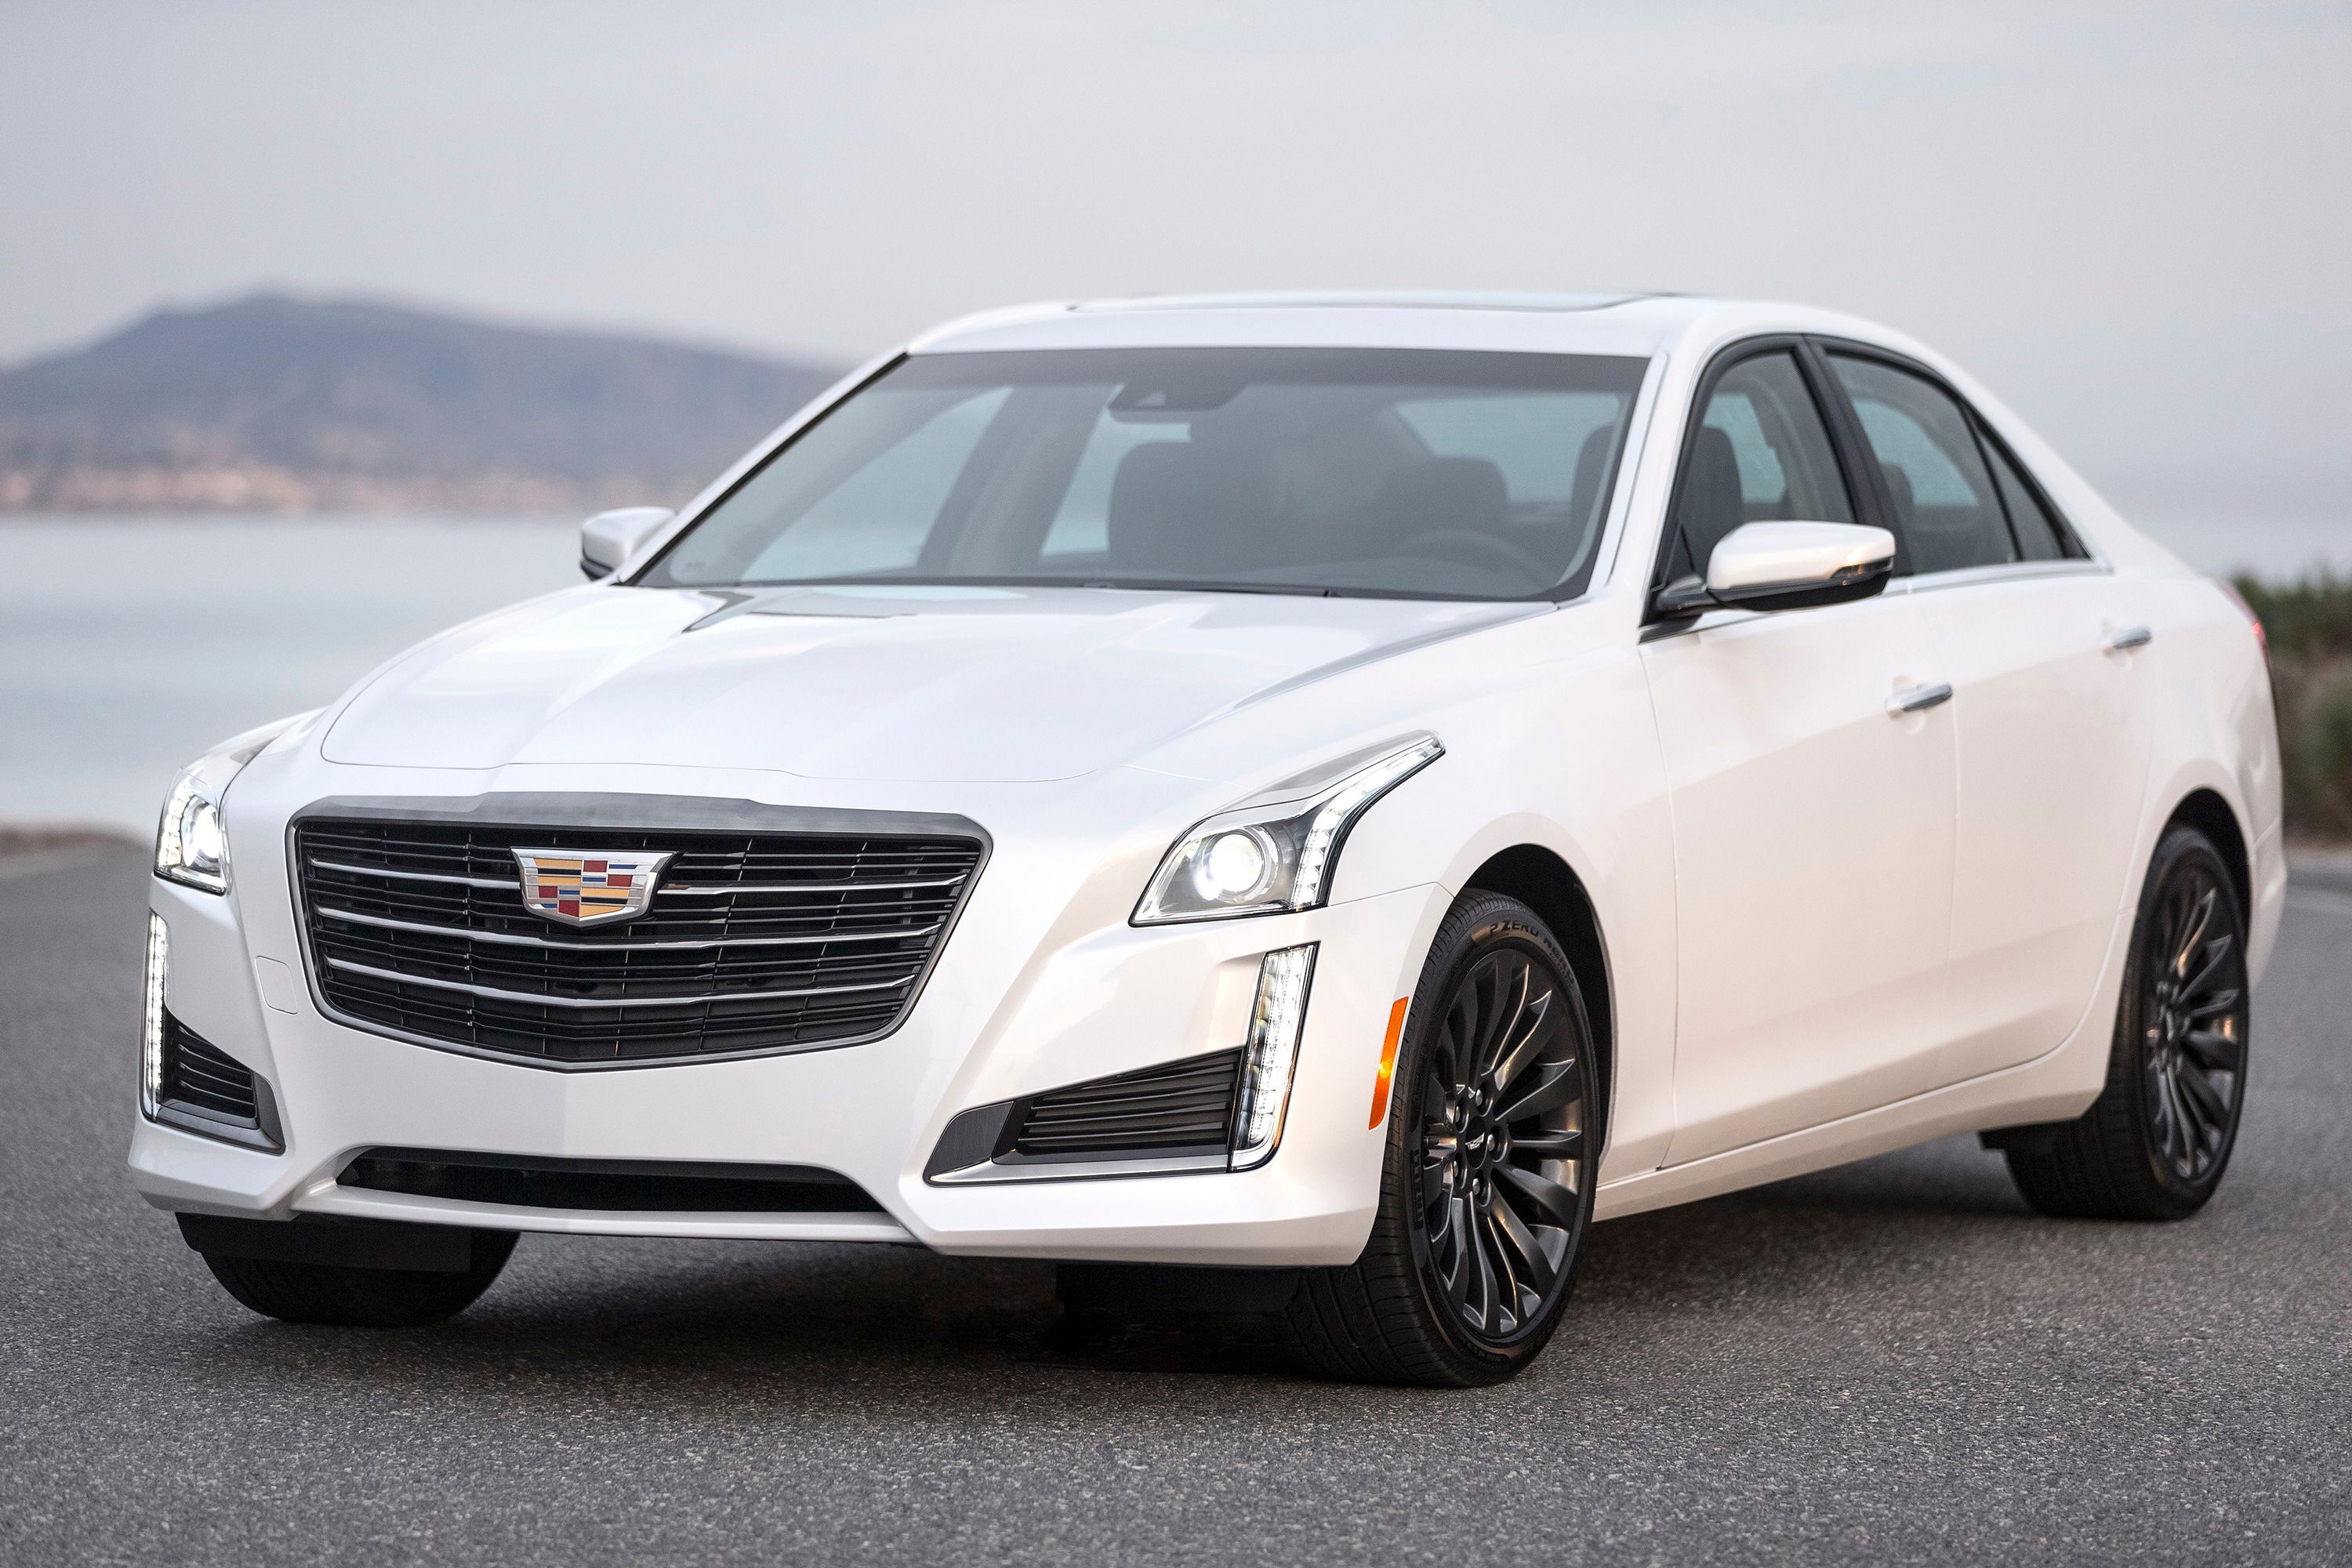 2016 Cadillac CTS Black Chrome Package